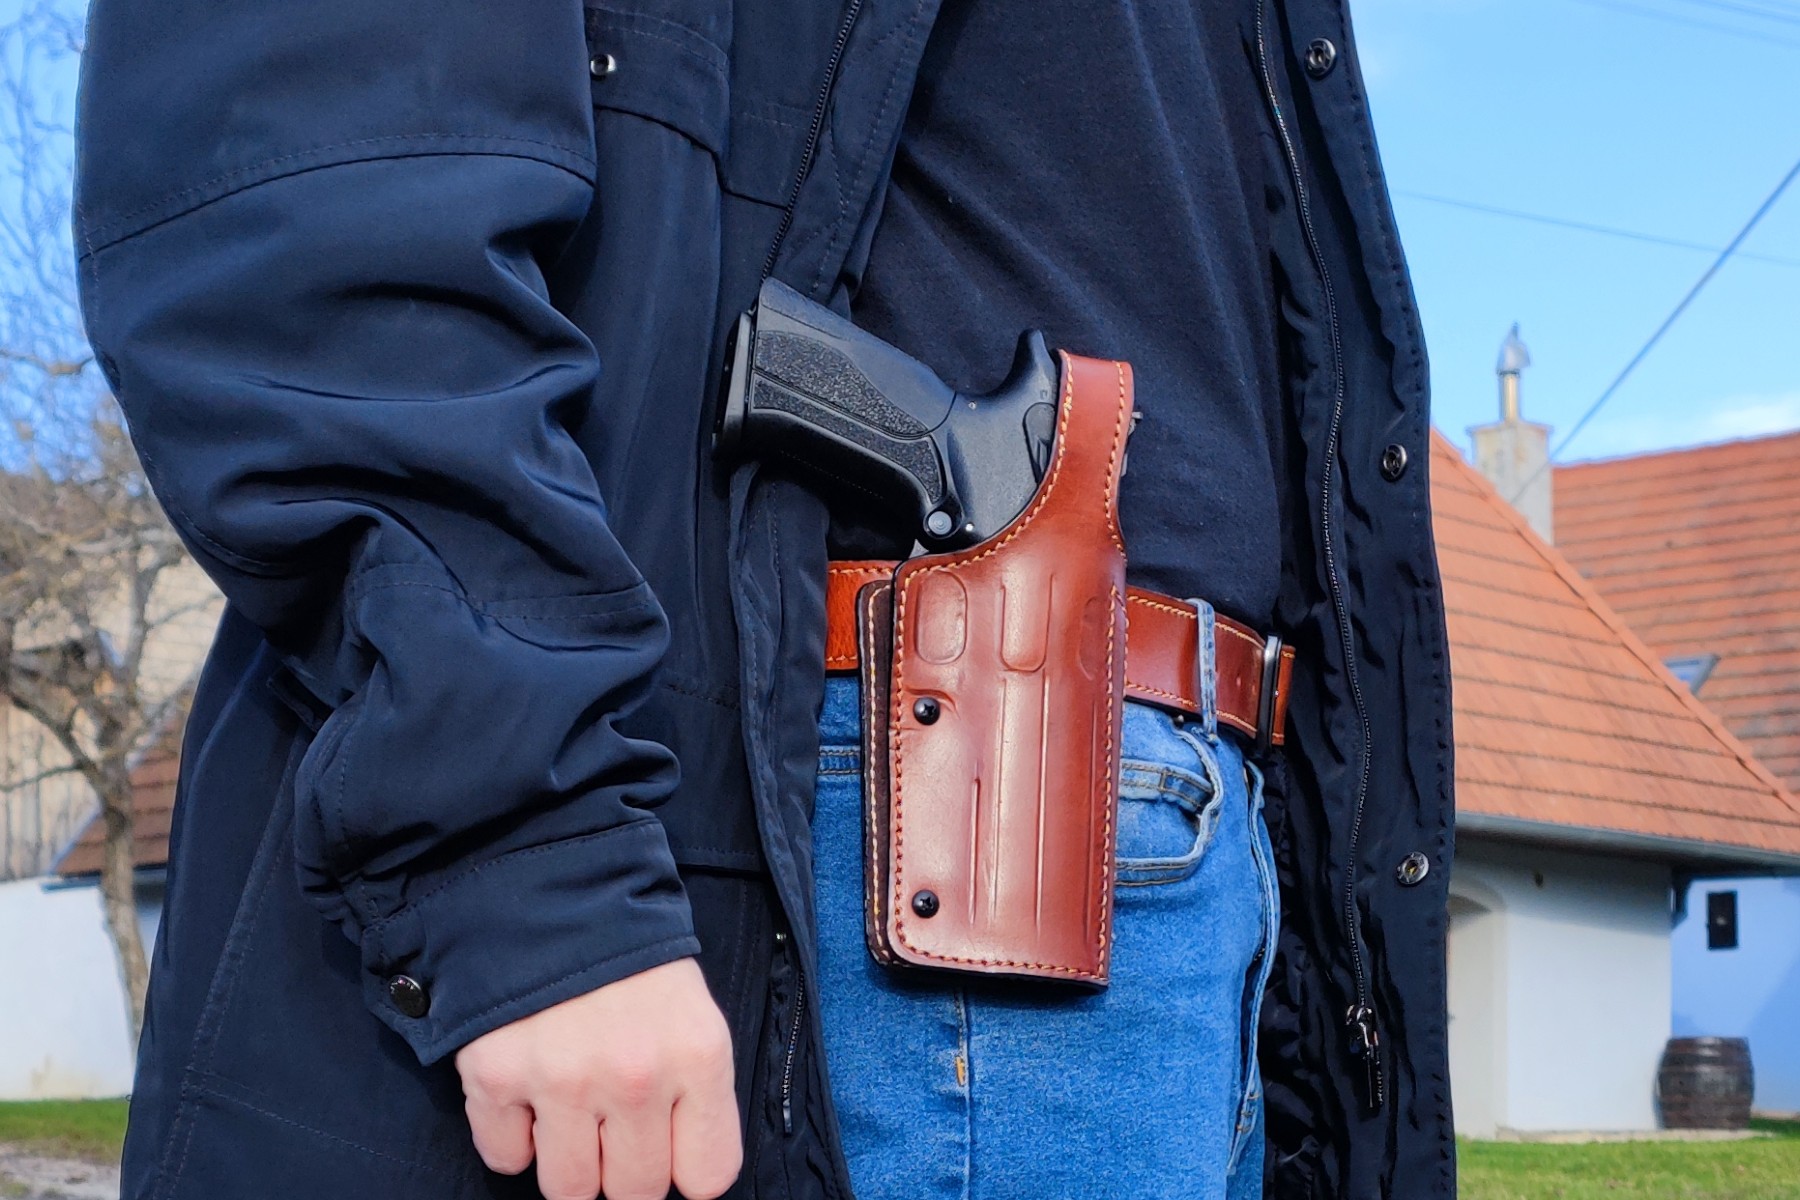 OWB Holster with adjustable retention